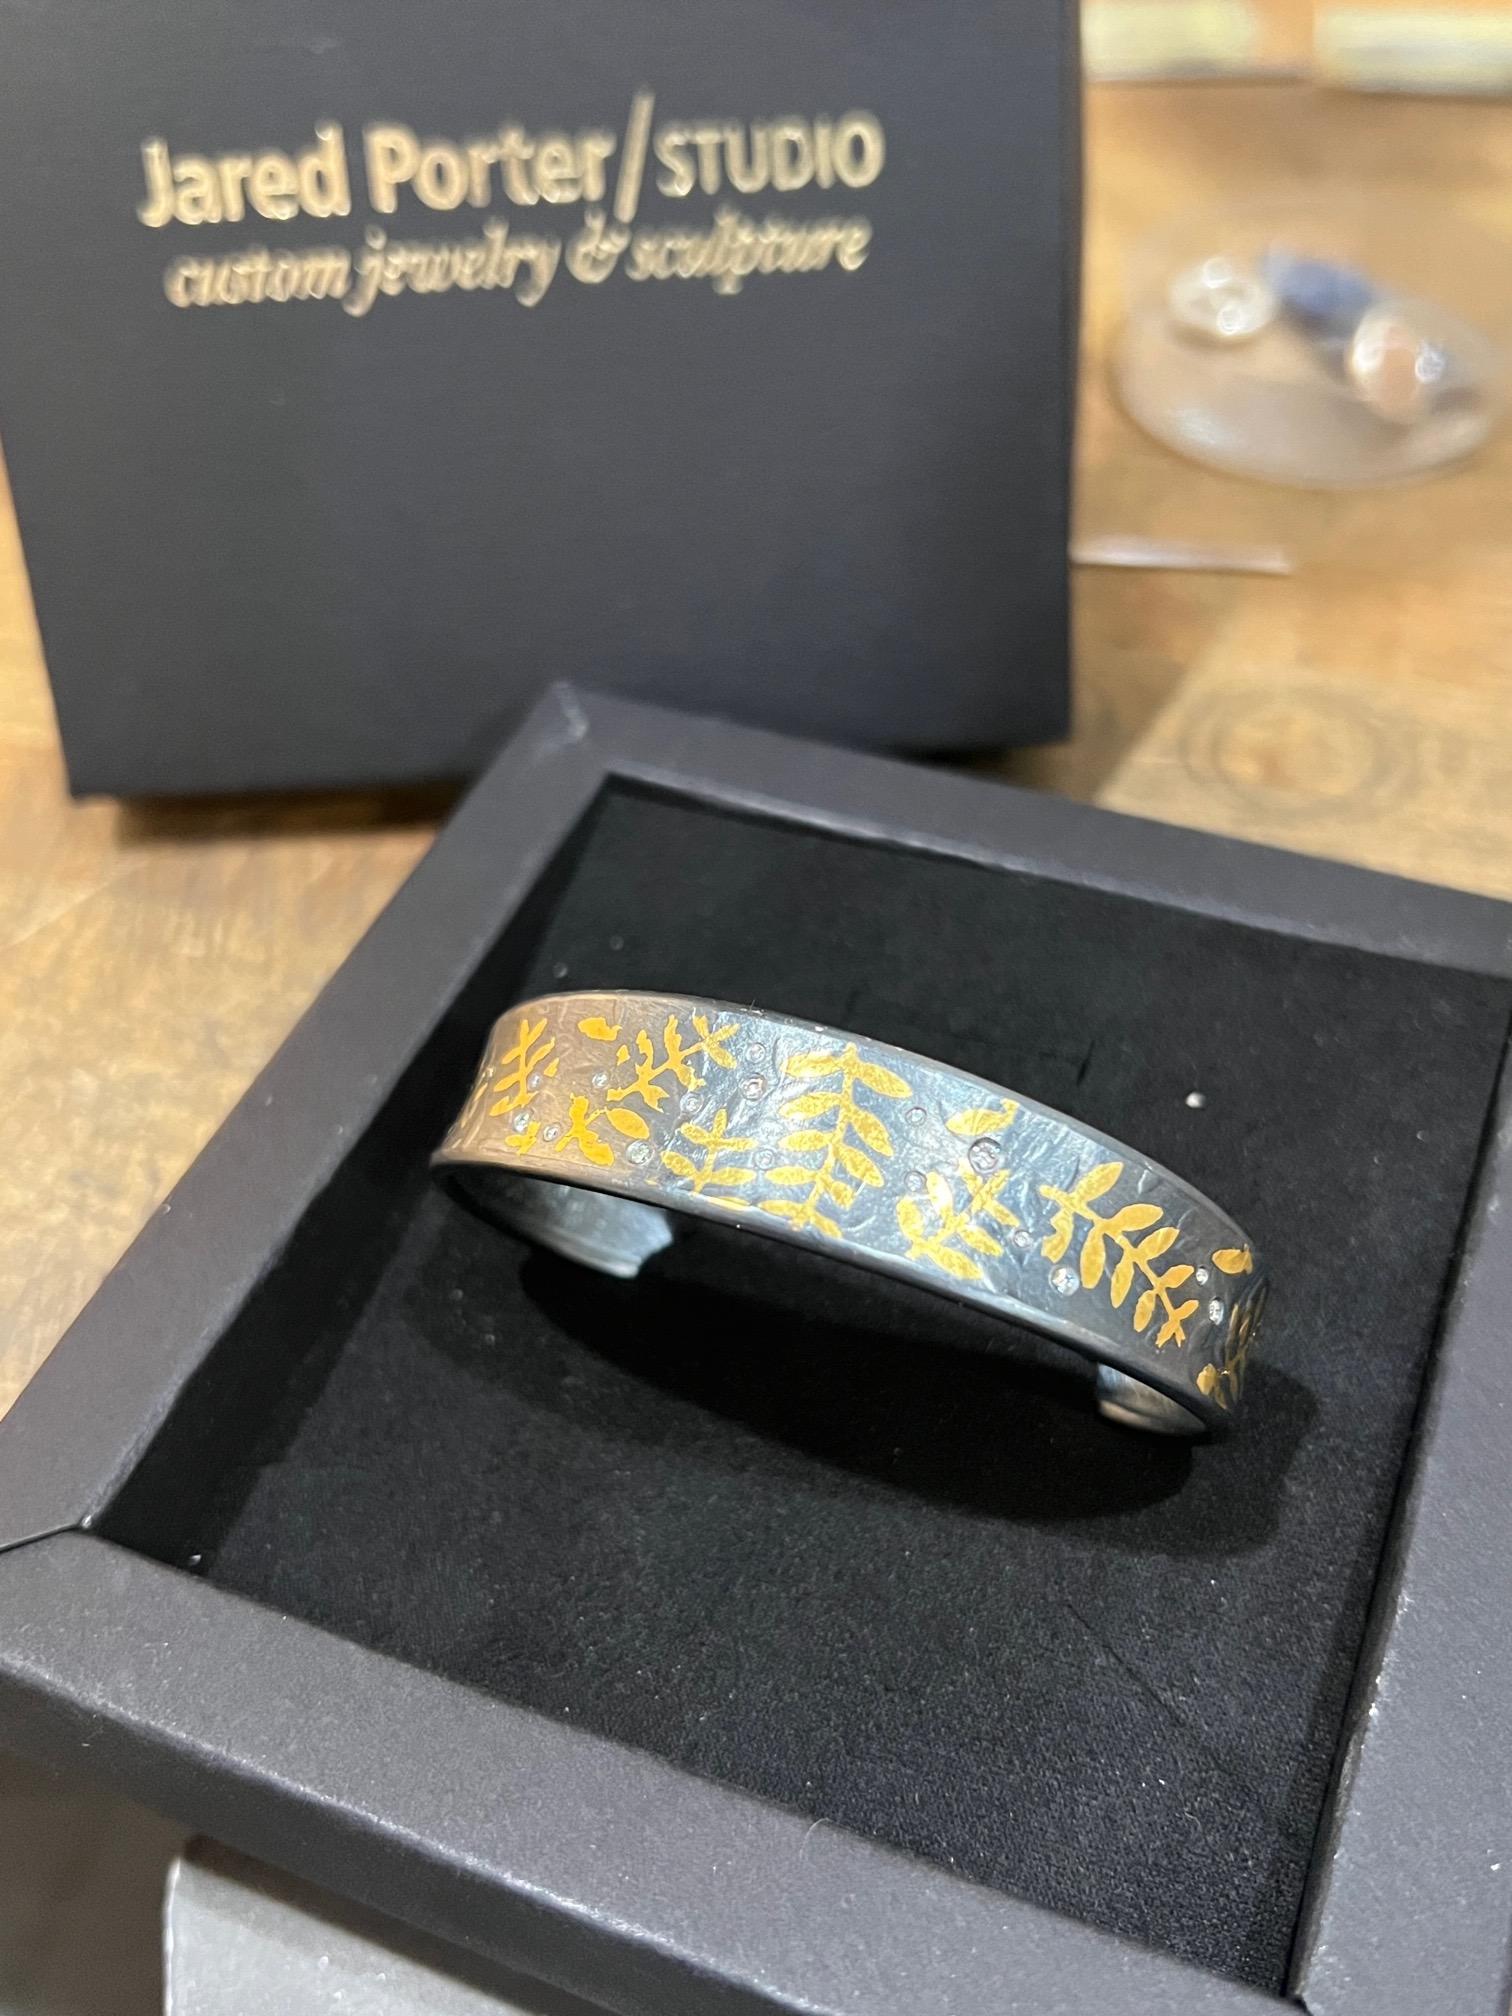 White Brilliant Cut Diamond And 24K Keum-boo Gold Leaf Fern Cuff Bracelet.

Hand forged one-of-a-kind by Jared Porter Studio out of Beautiful Colorado.

Sterling Silver with a Patina (oxidized) finish.

Keum-boo (also Geumbu, Kum-Boo or